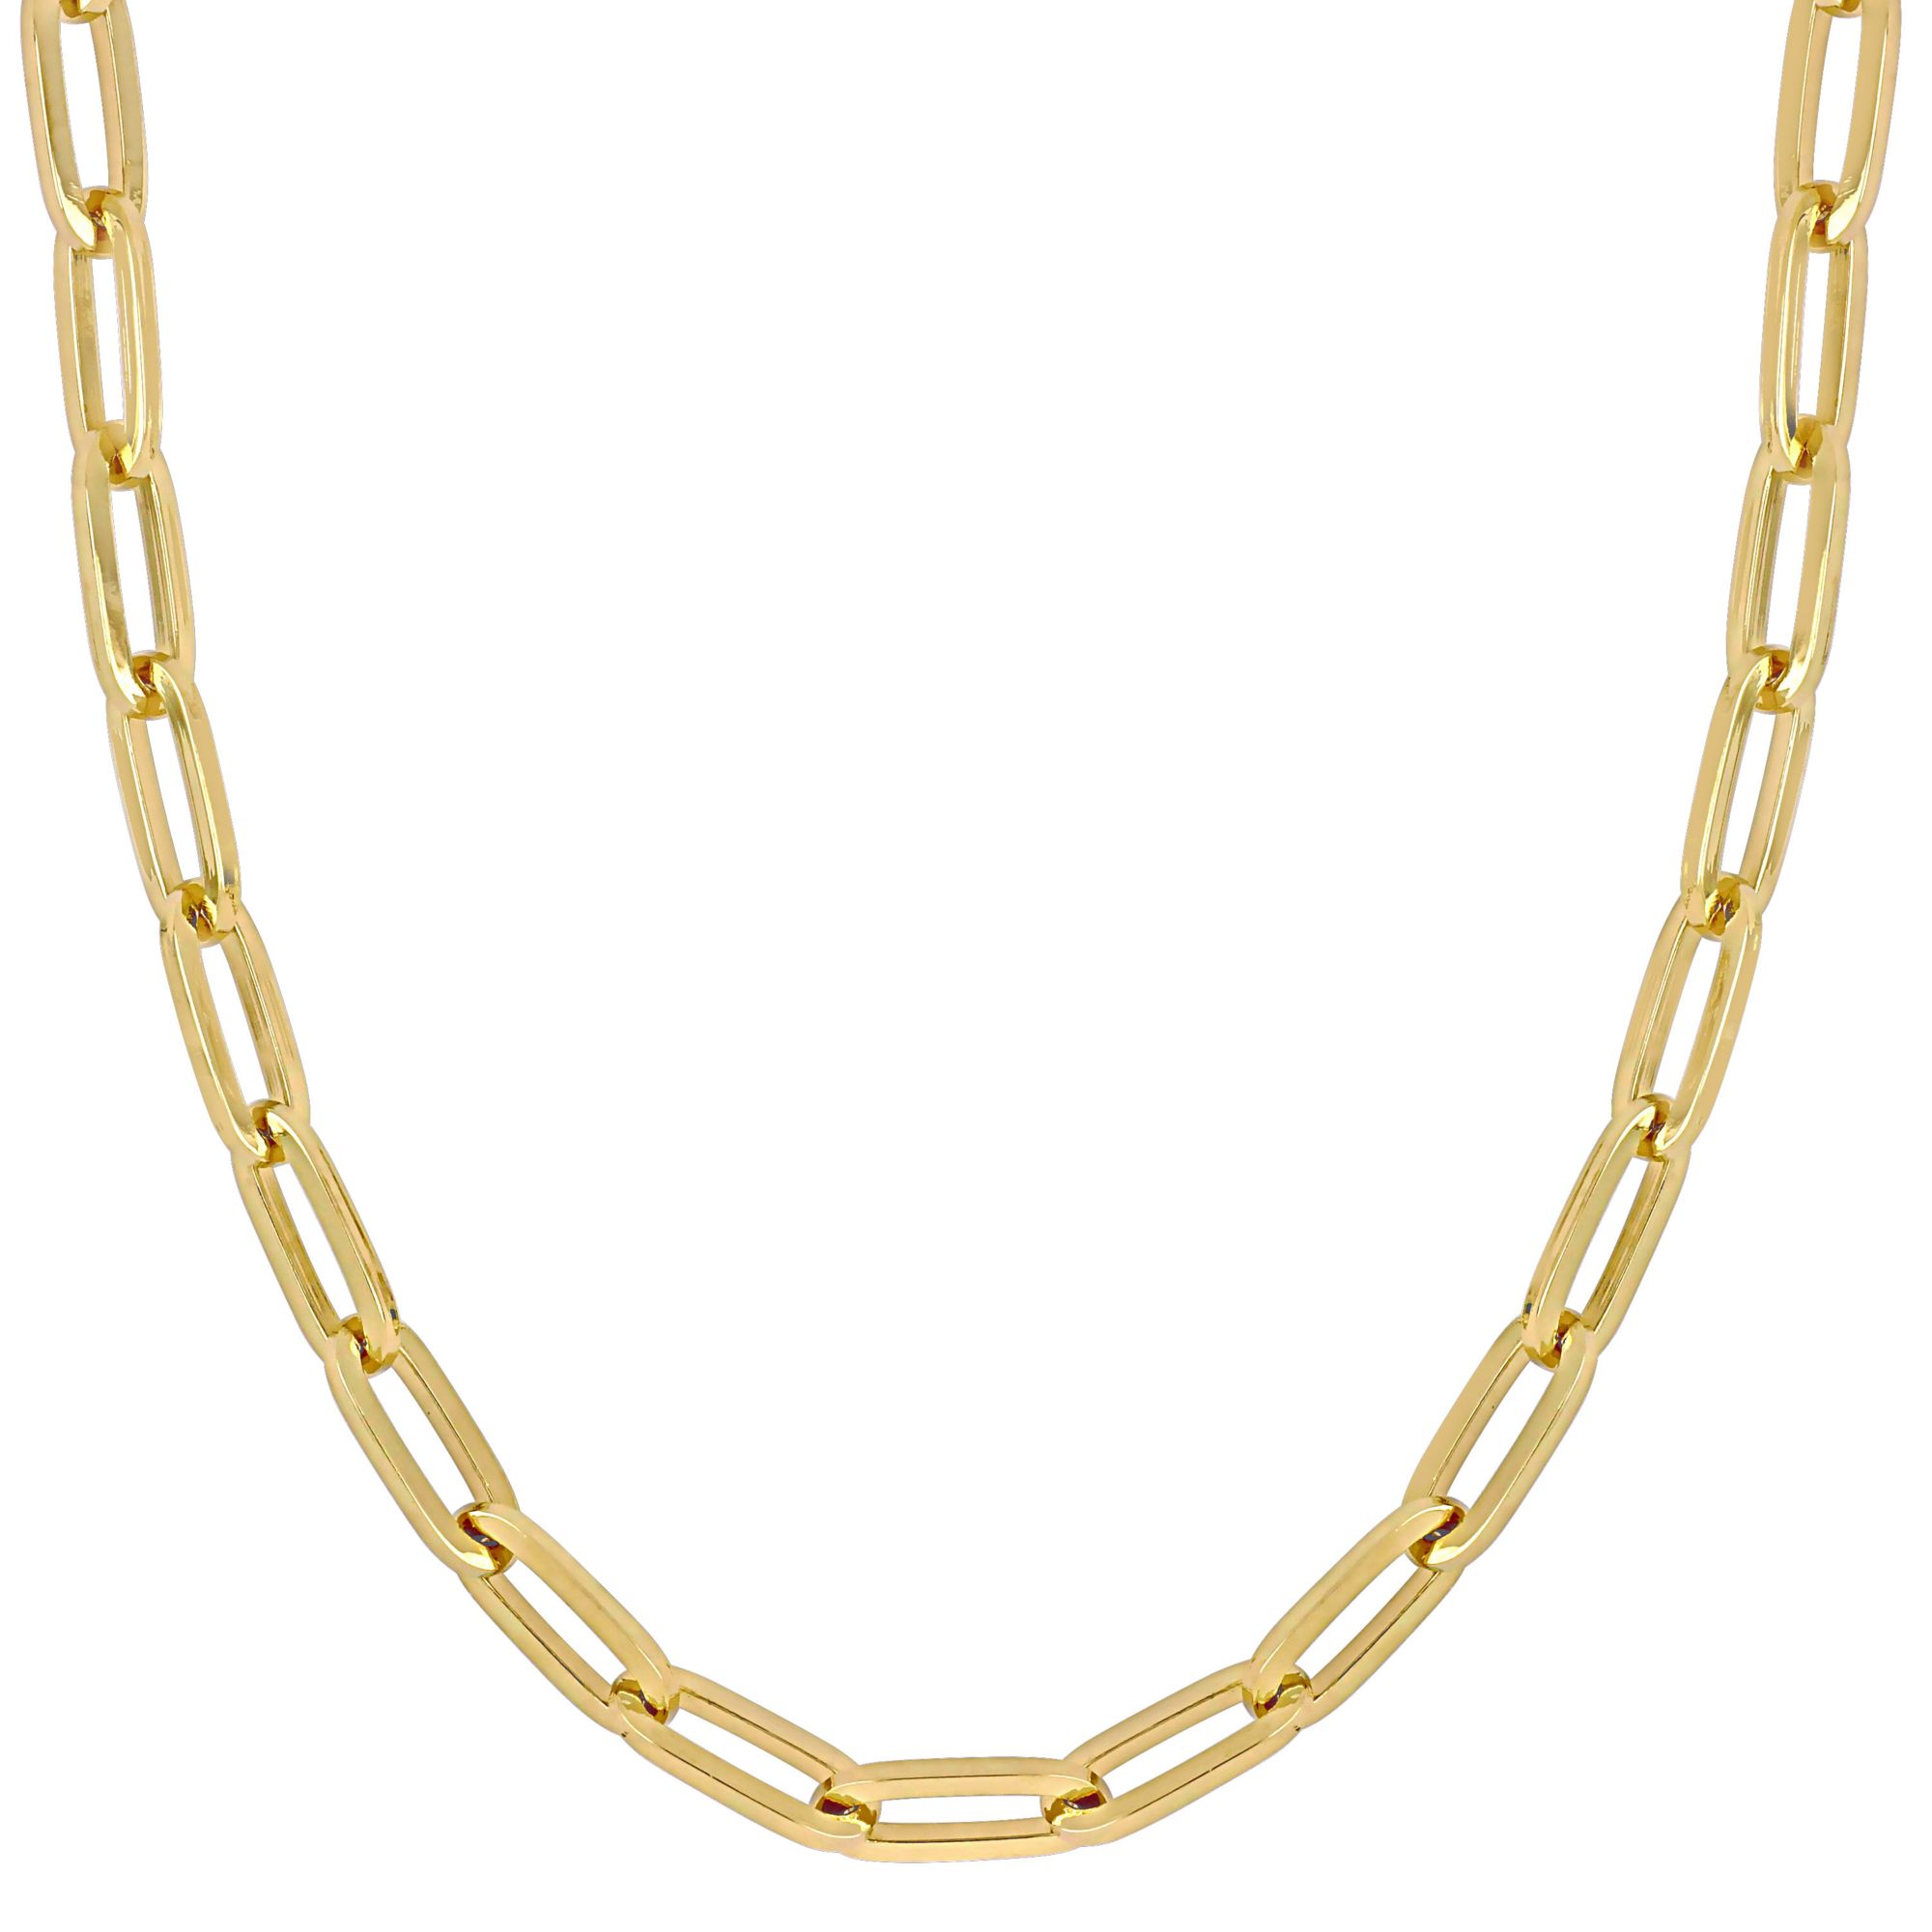 Men's 7mm Mariner Link Chain Necklace in 10k Yellow Gold - 20